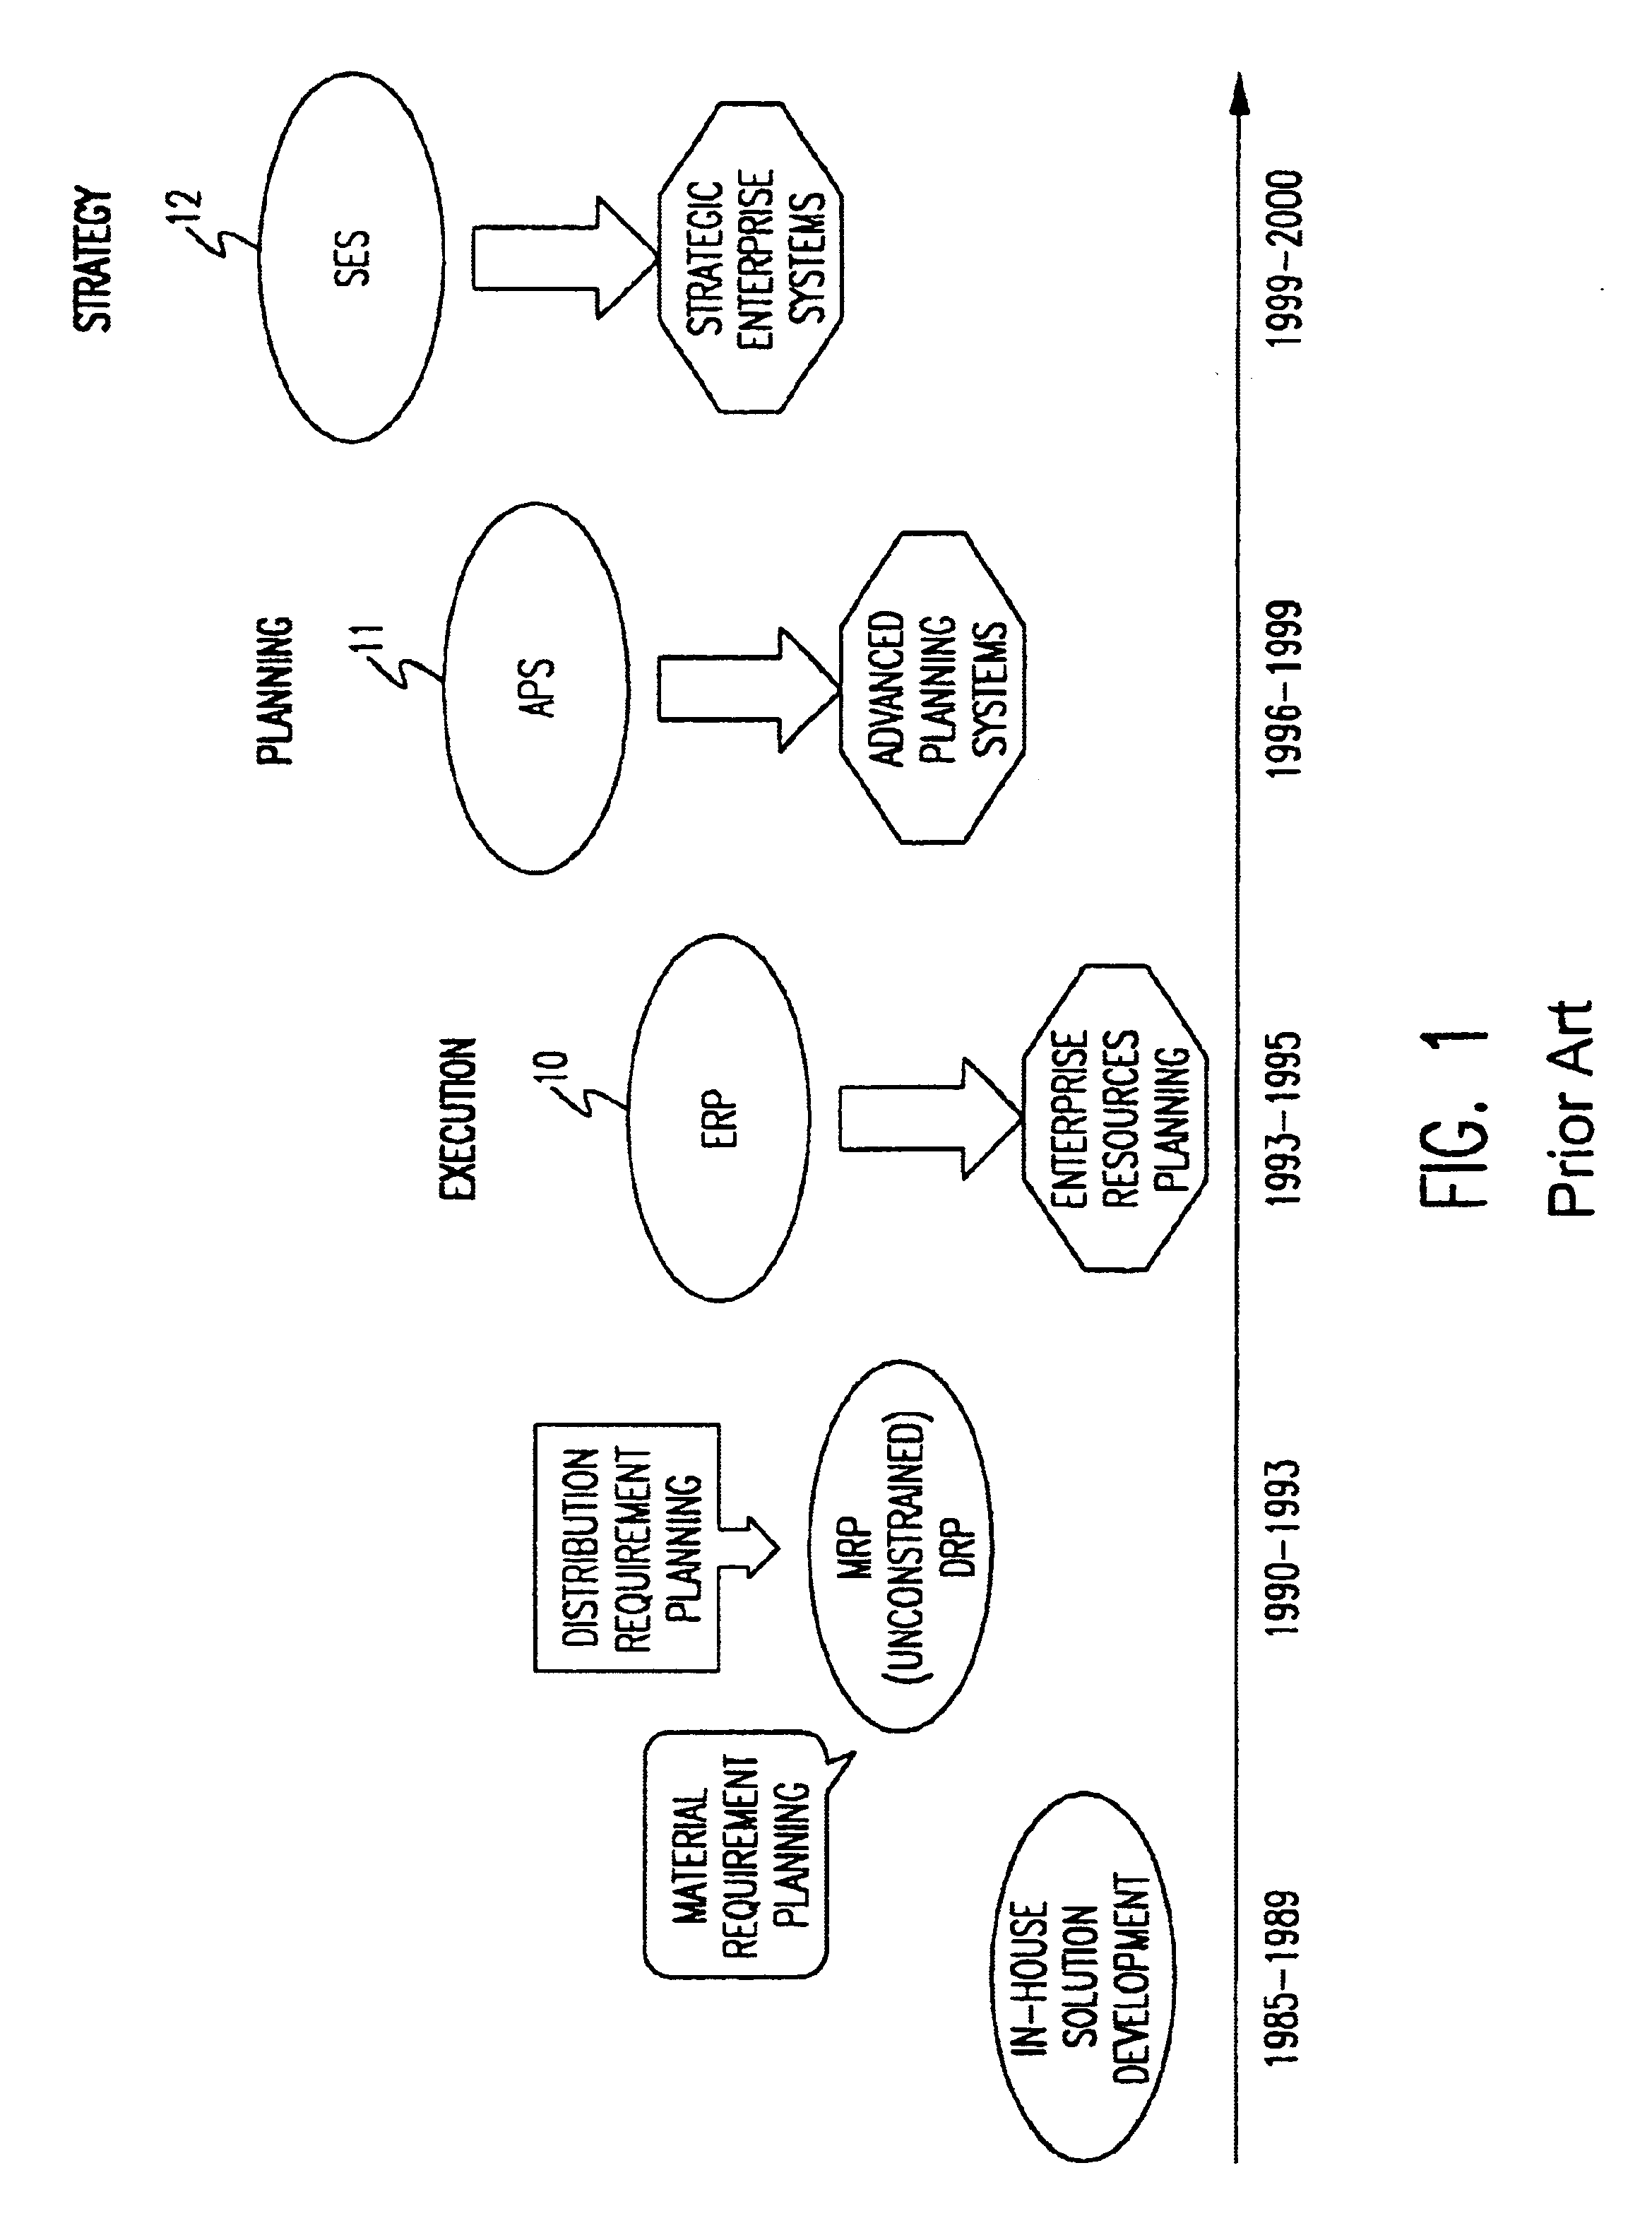 Method for integrated supply chain and financial management